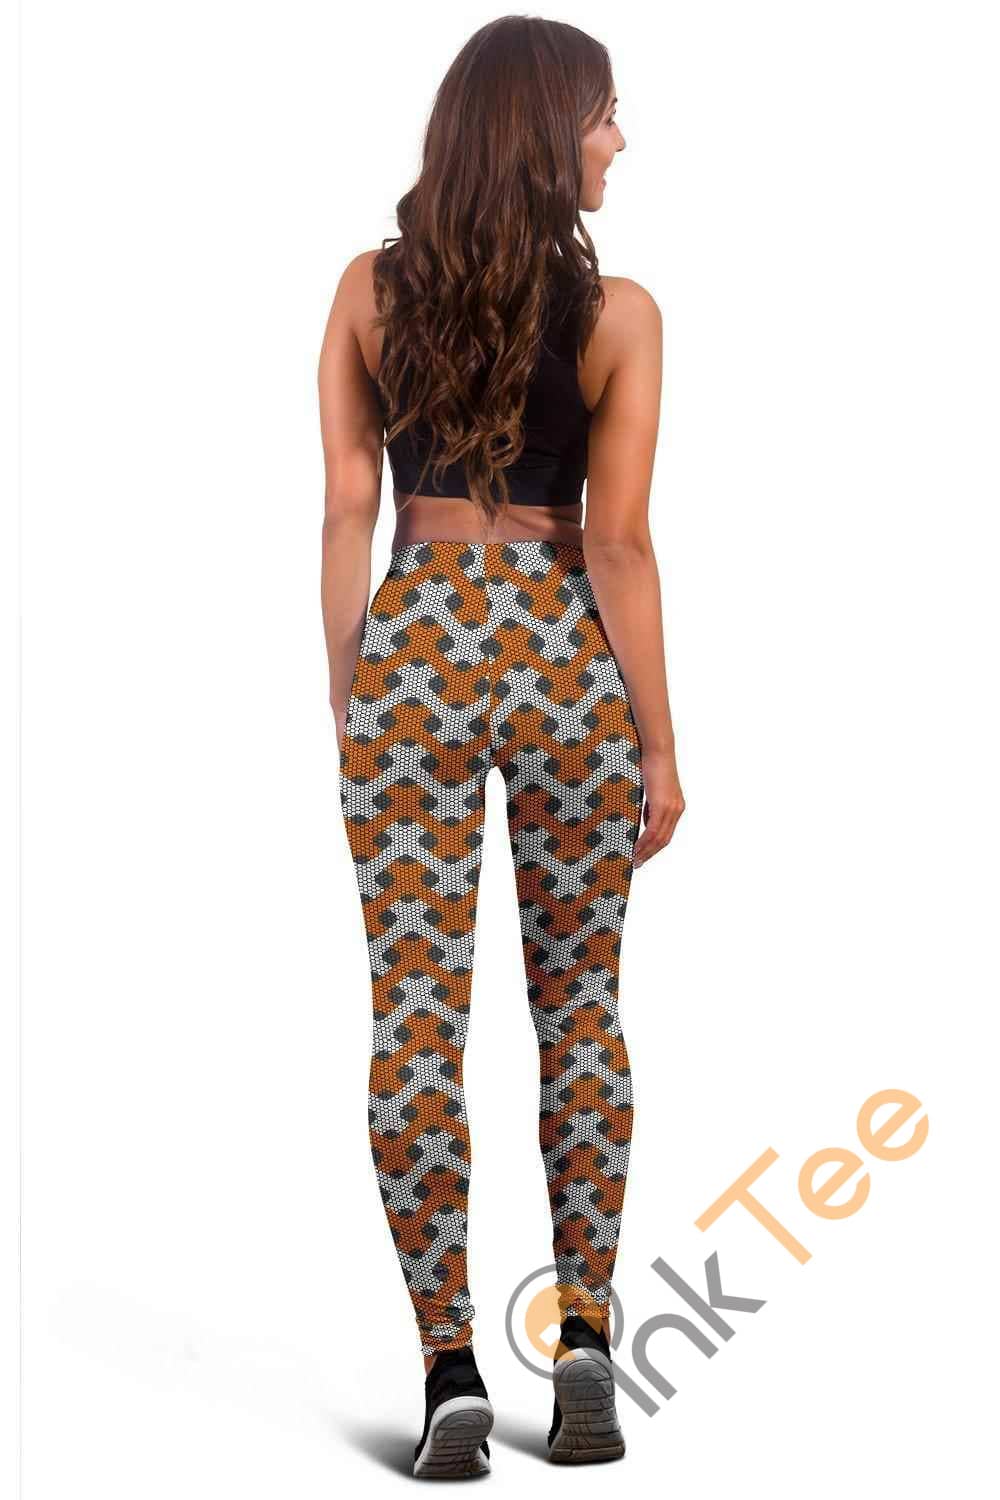 Inktee Store - Tennessee Volunteers Inspired 3D All Over Print For Yoga Fitness Fashion Women'S Leggings Image